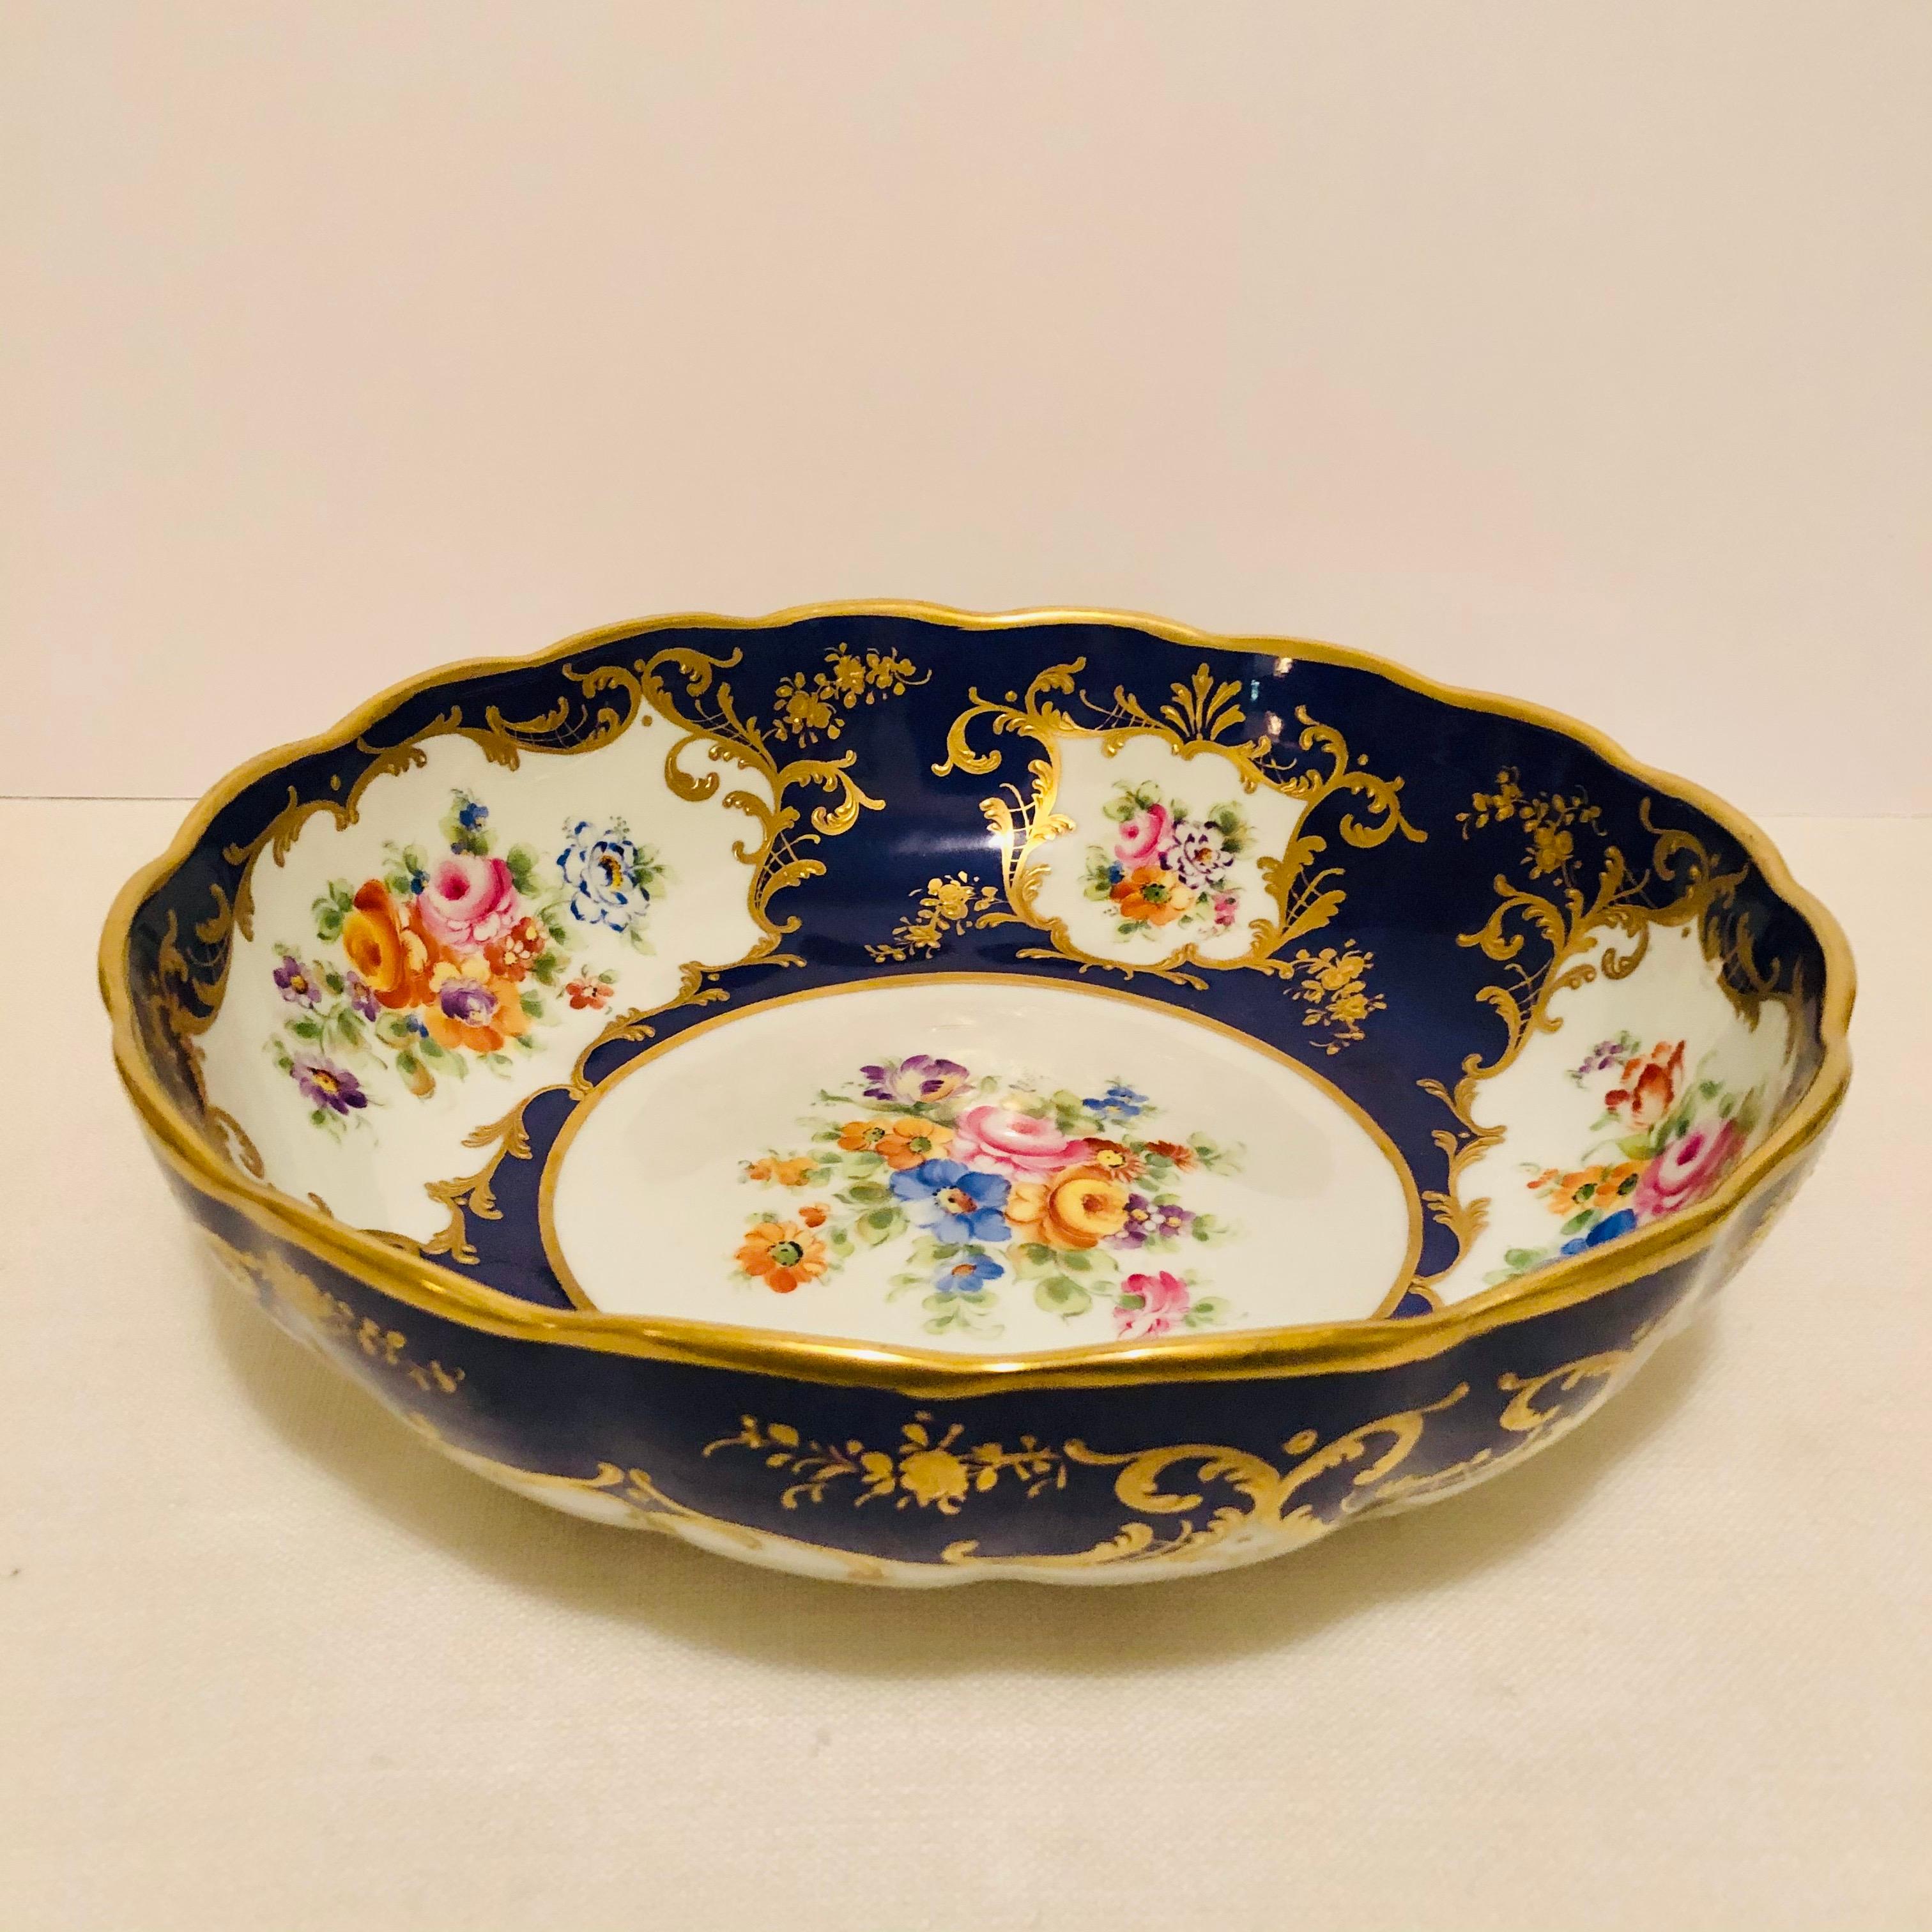 This is a gorgeous royal blue Le Tallec bowl with a hand-painted central flower bouquet and four painted colorful bouquet cartouches on the inside of the bowl. The bowl is accented with raised gold arabesque decoration as well as raised gilded